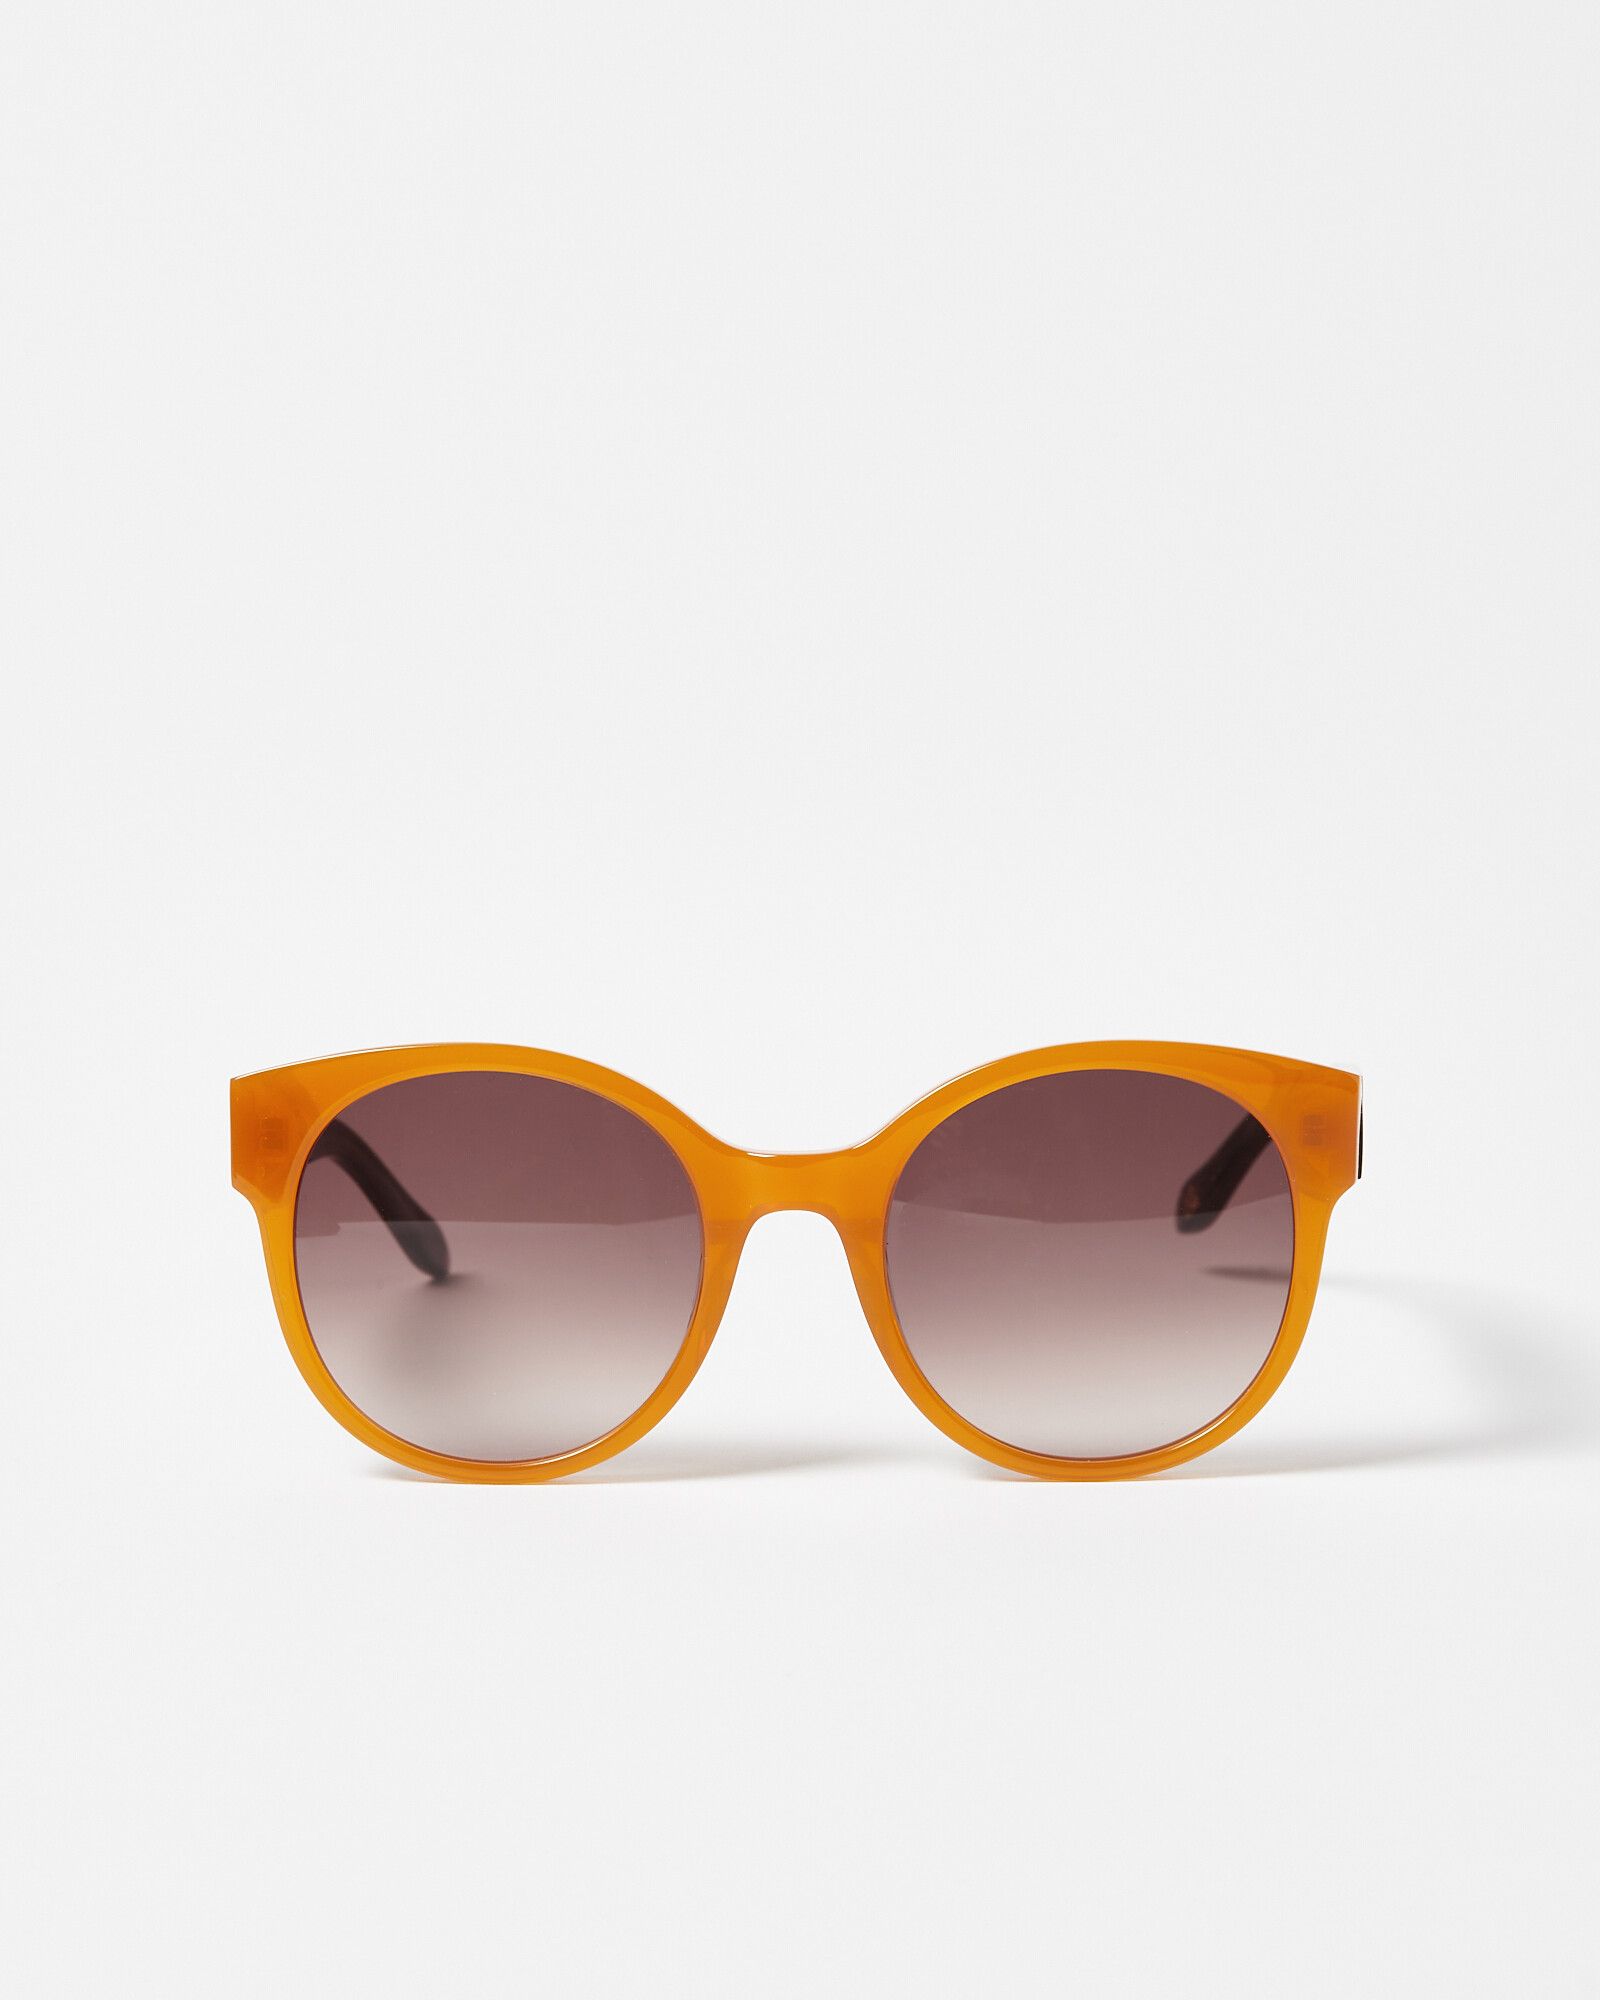 MELLER | Official Website - Trendy Sunglasses, Watches & Accessories